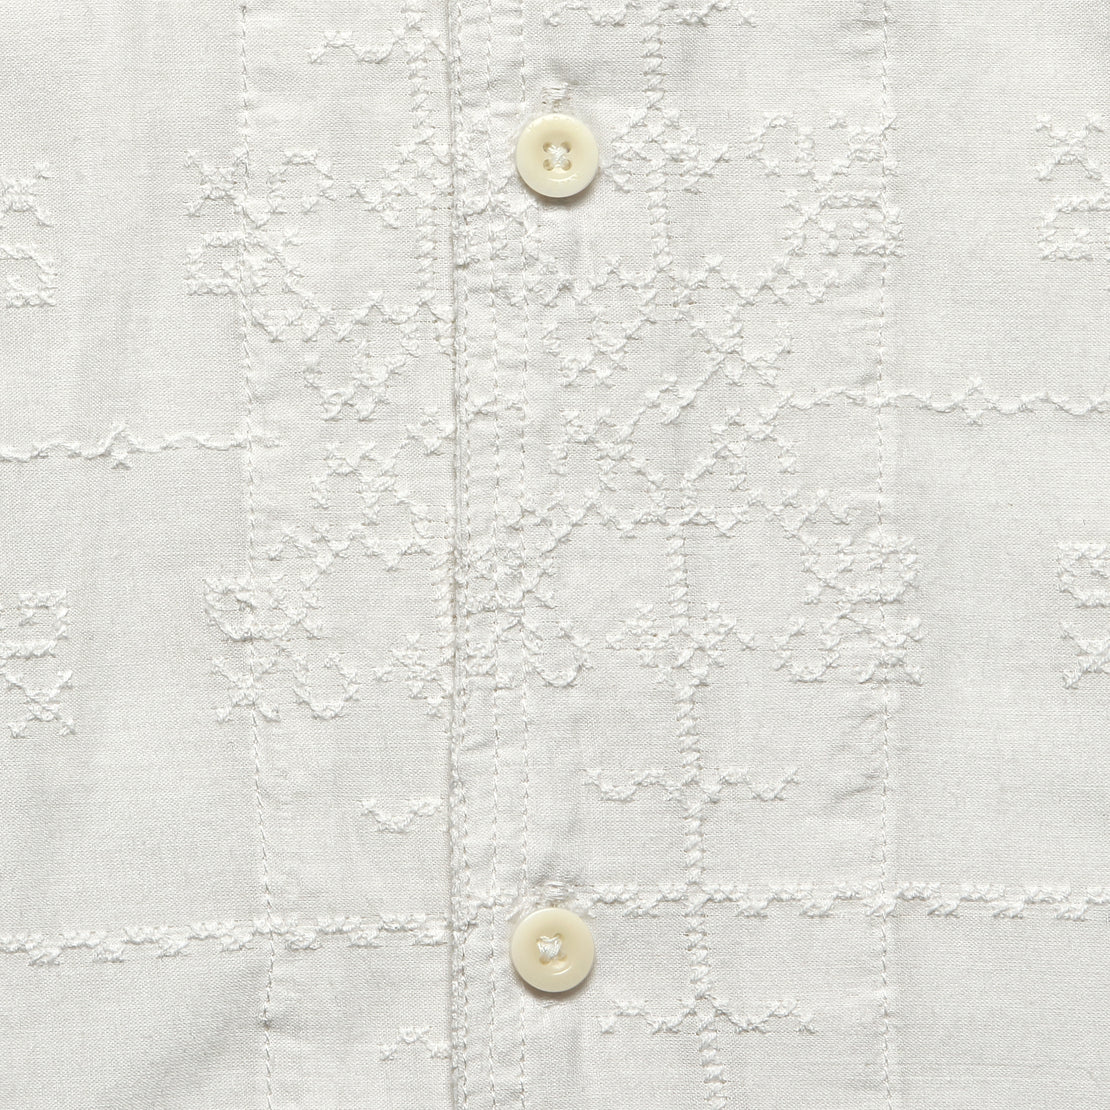 Schiffli Embroidered Shirt - White - Kardo - STAG Provisions - Tops - S/S Woven - Solid